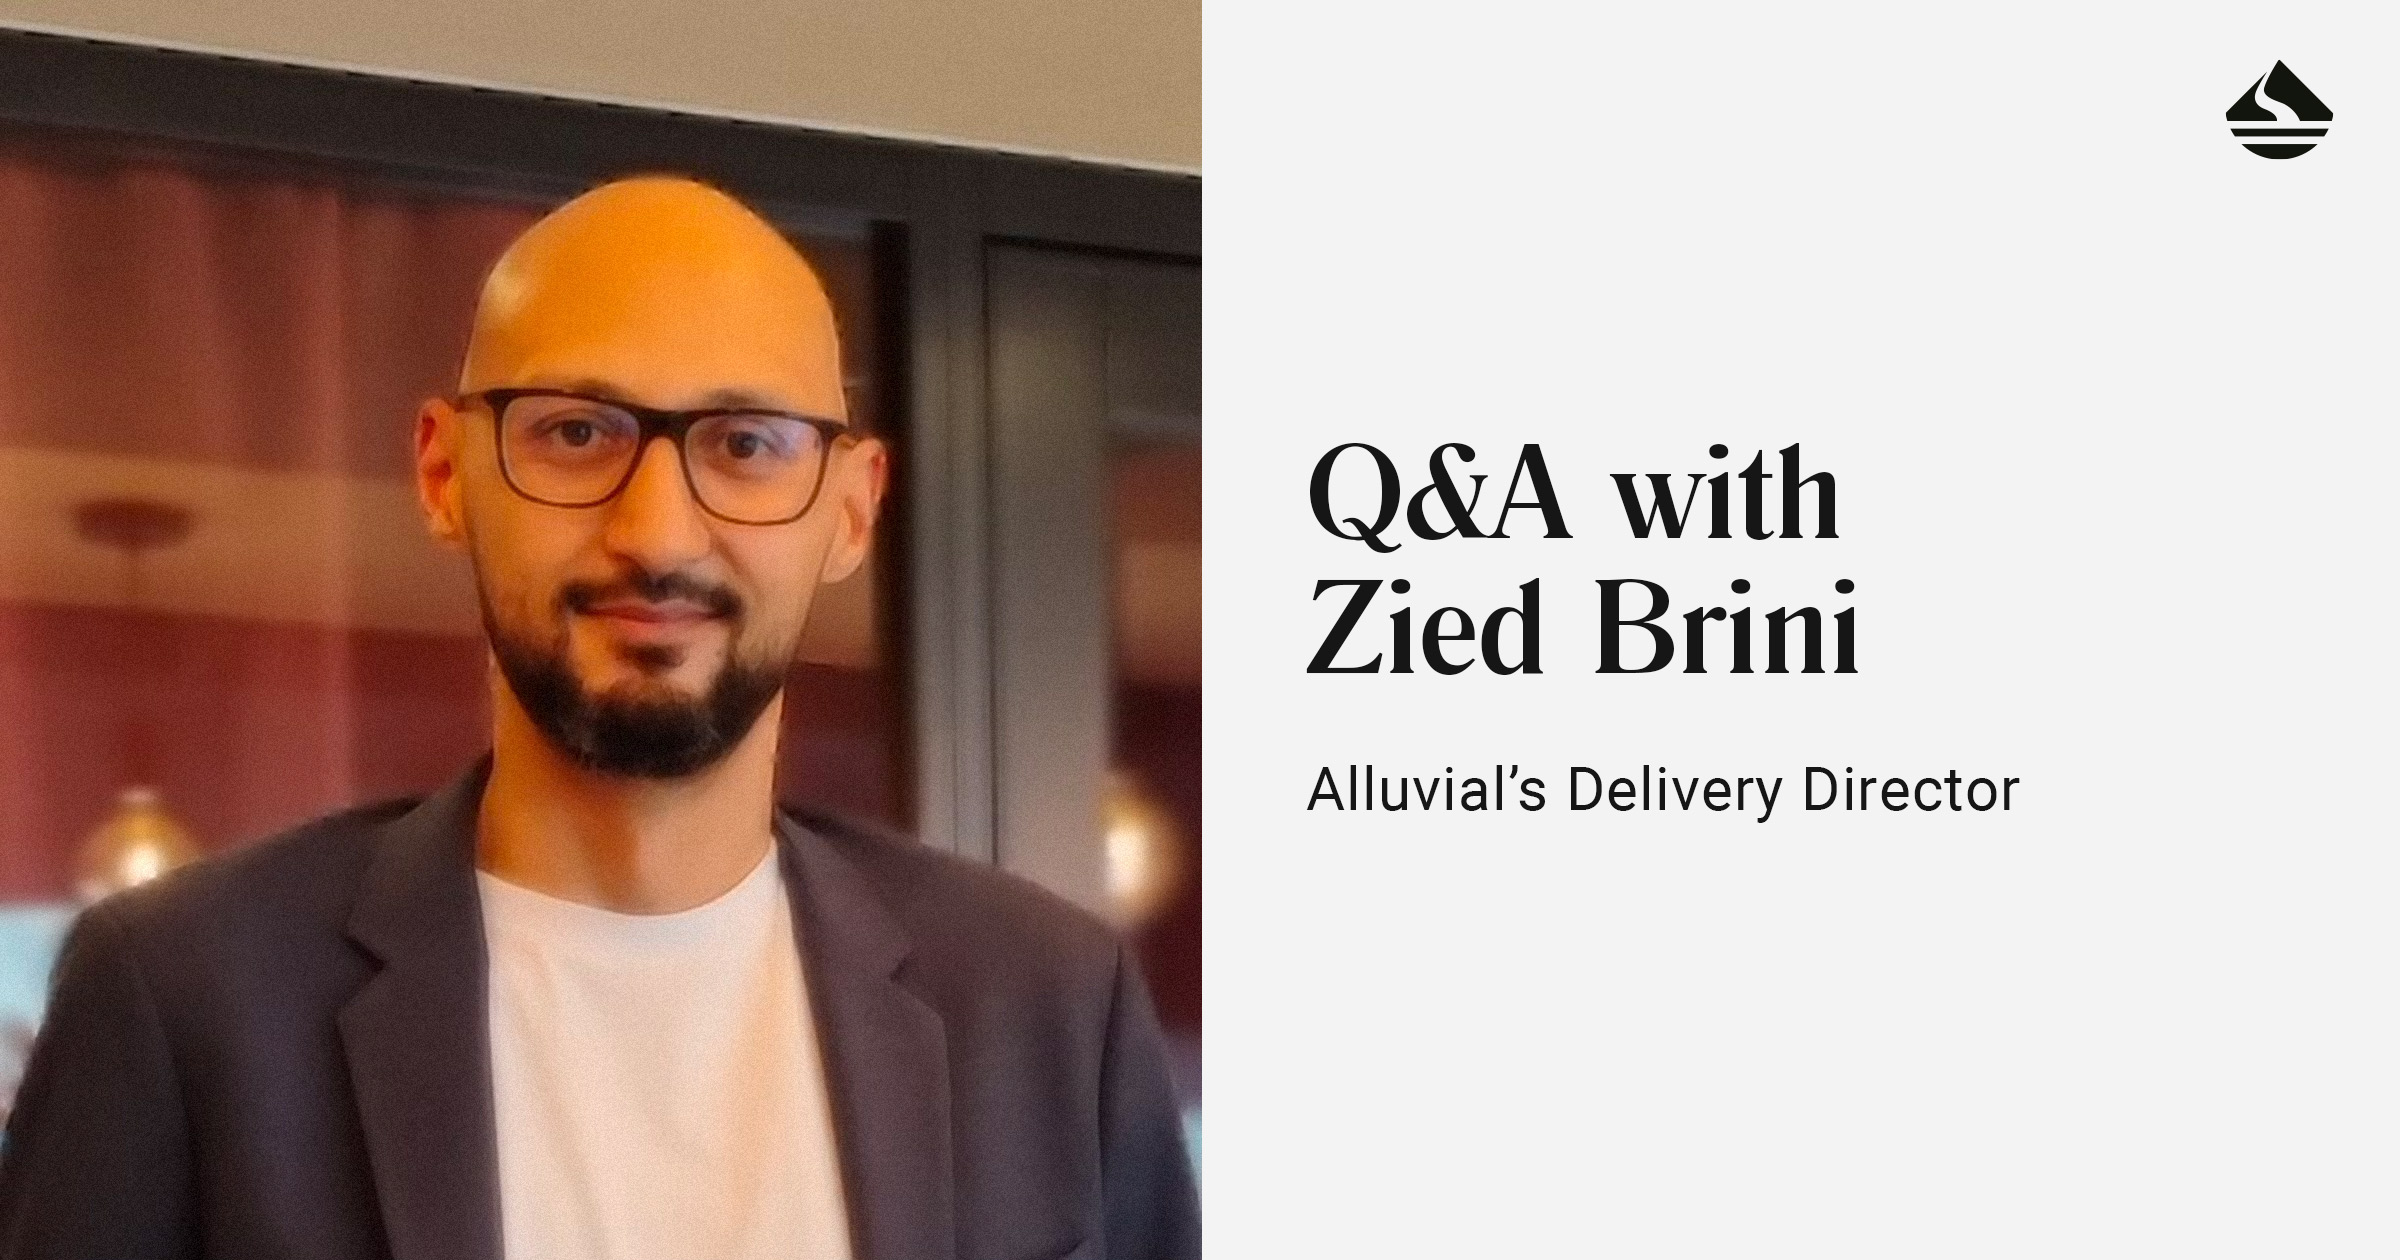 Q&A with Zied Brini, Alluvial's Delivery Director